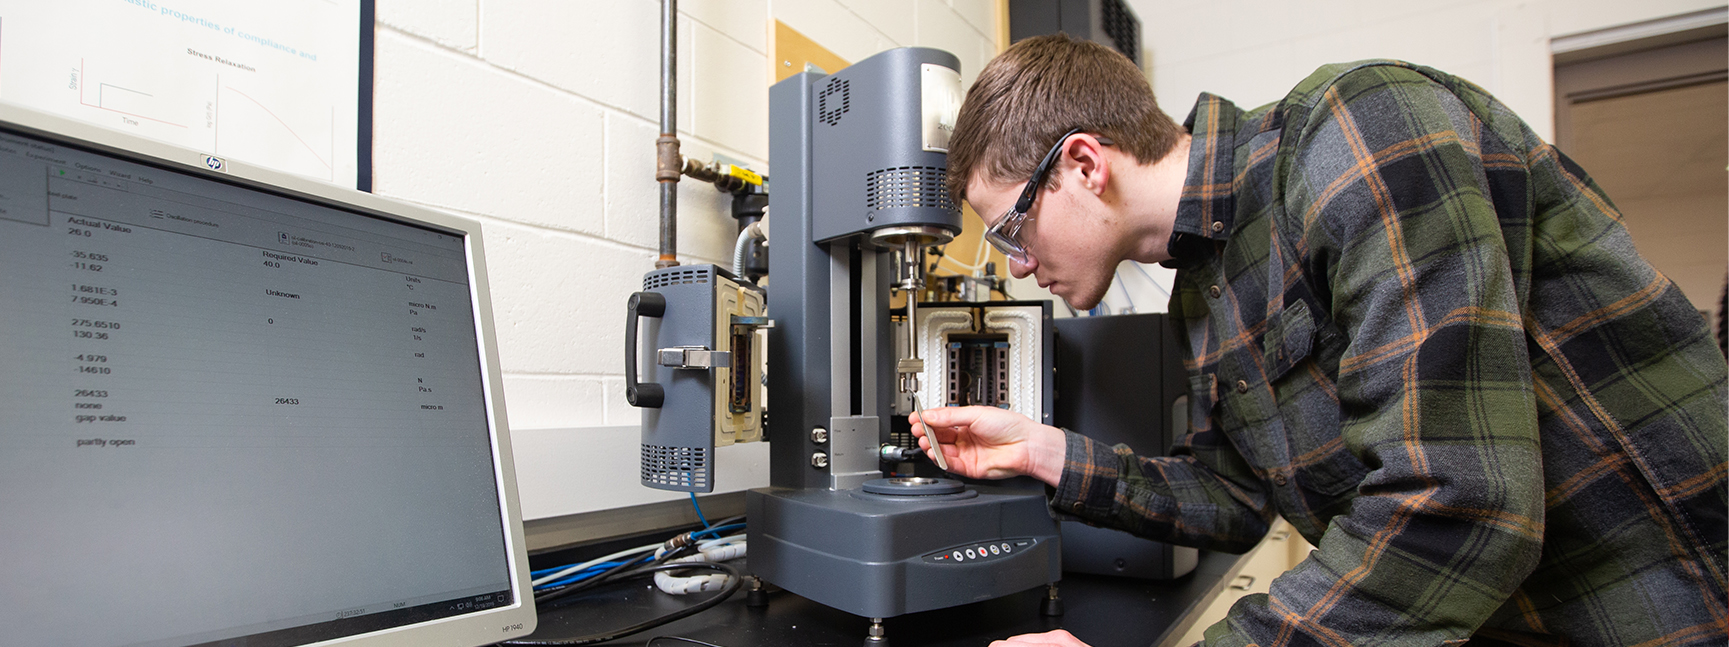 Student performs a stress test in the plastics engineering lab.